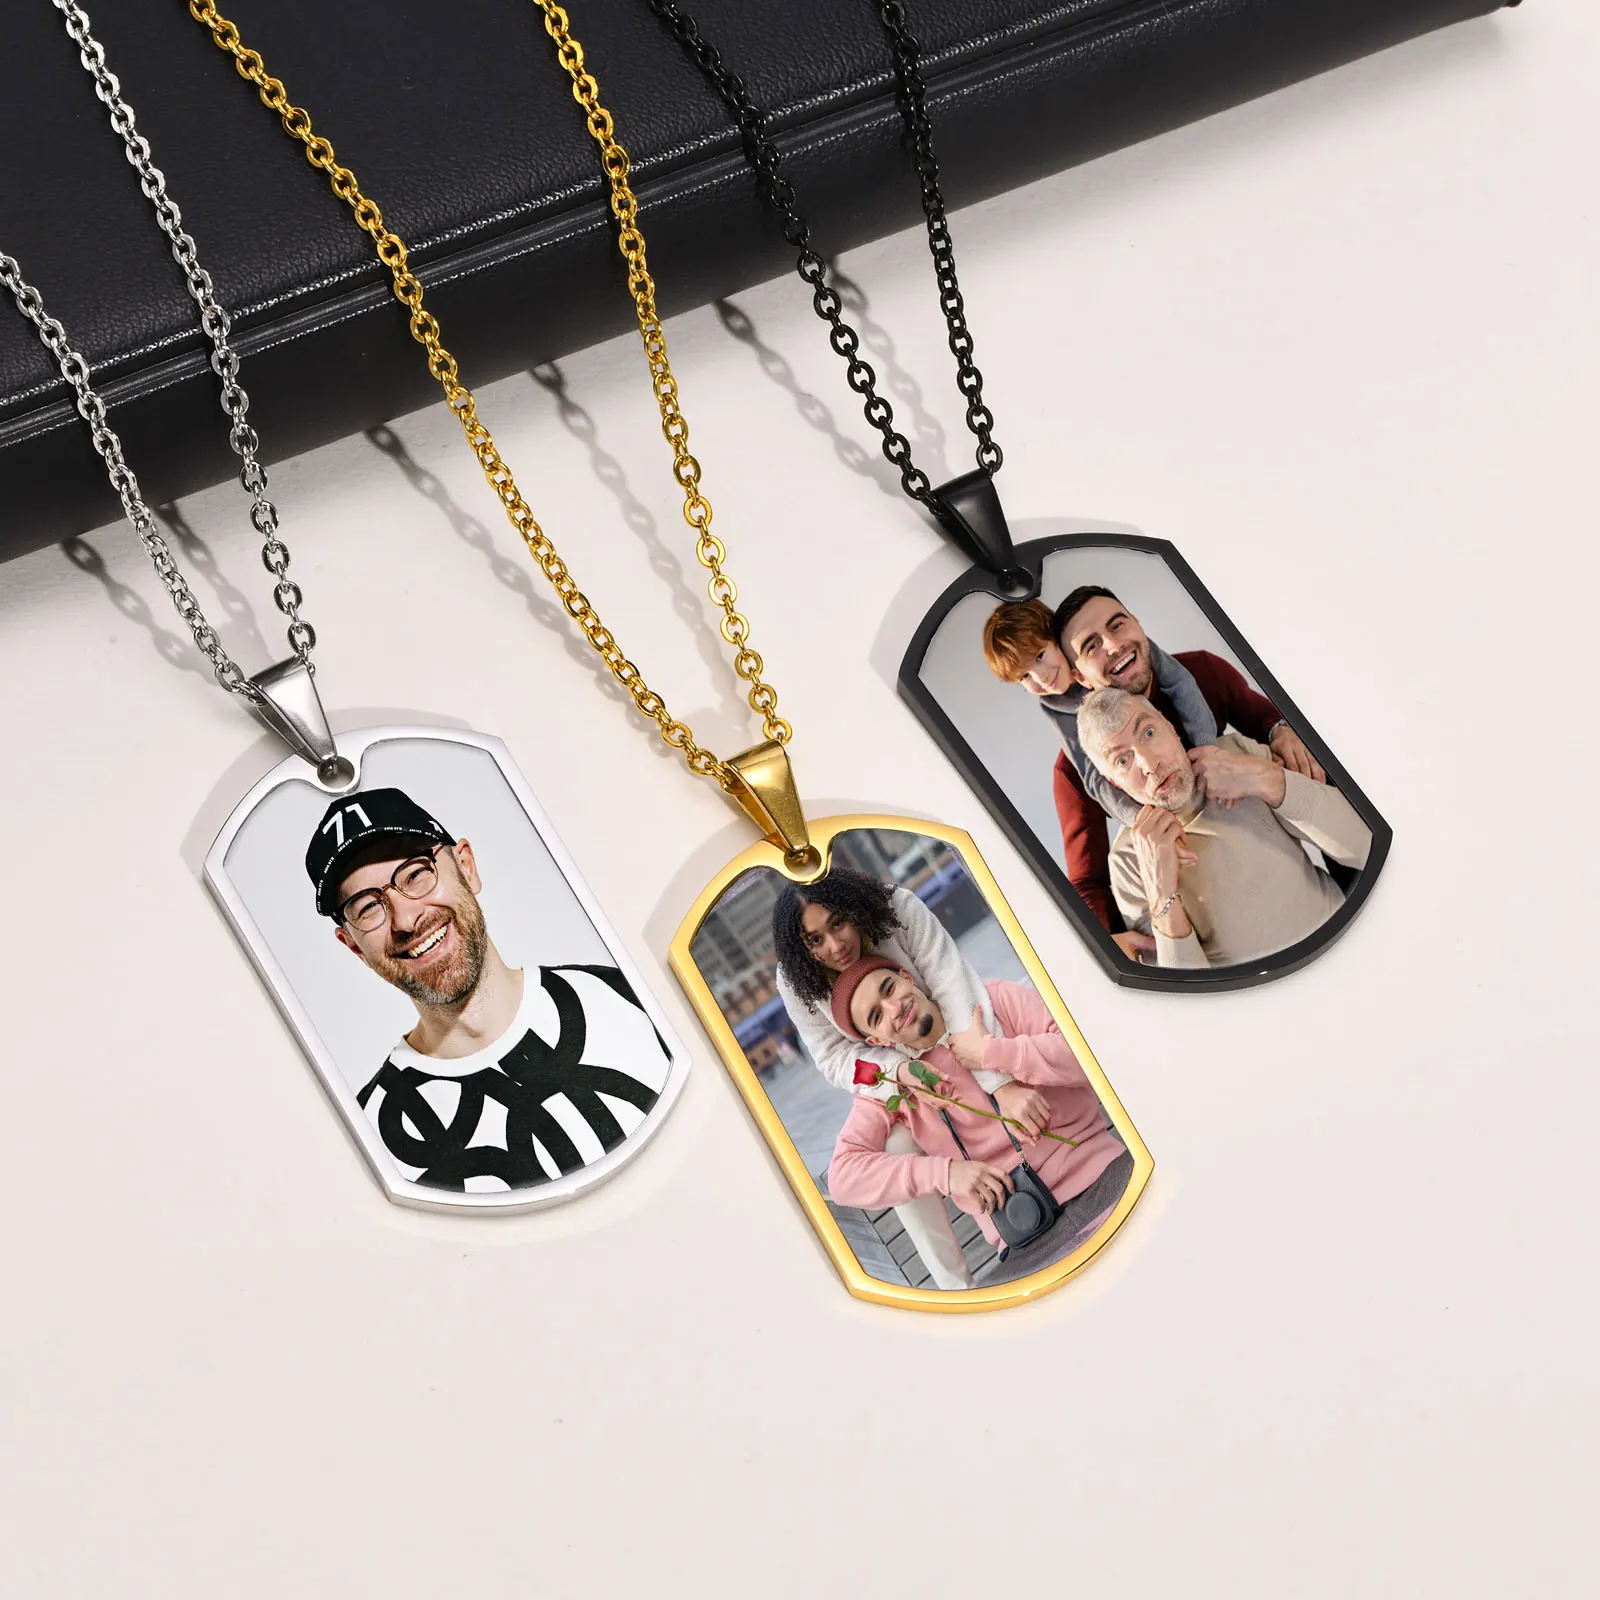 Men Personalize Engrave Name Custom The Photo of Family Pendant Necklaces,Picture Words Date Pendant Dogtag,Love Keepsake Gifts the keepsake